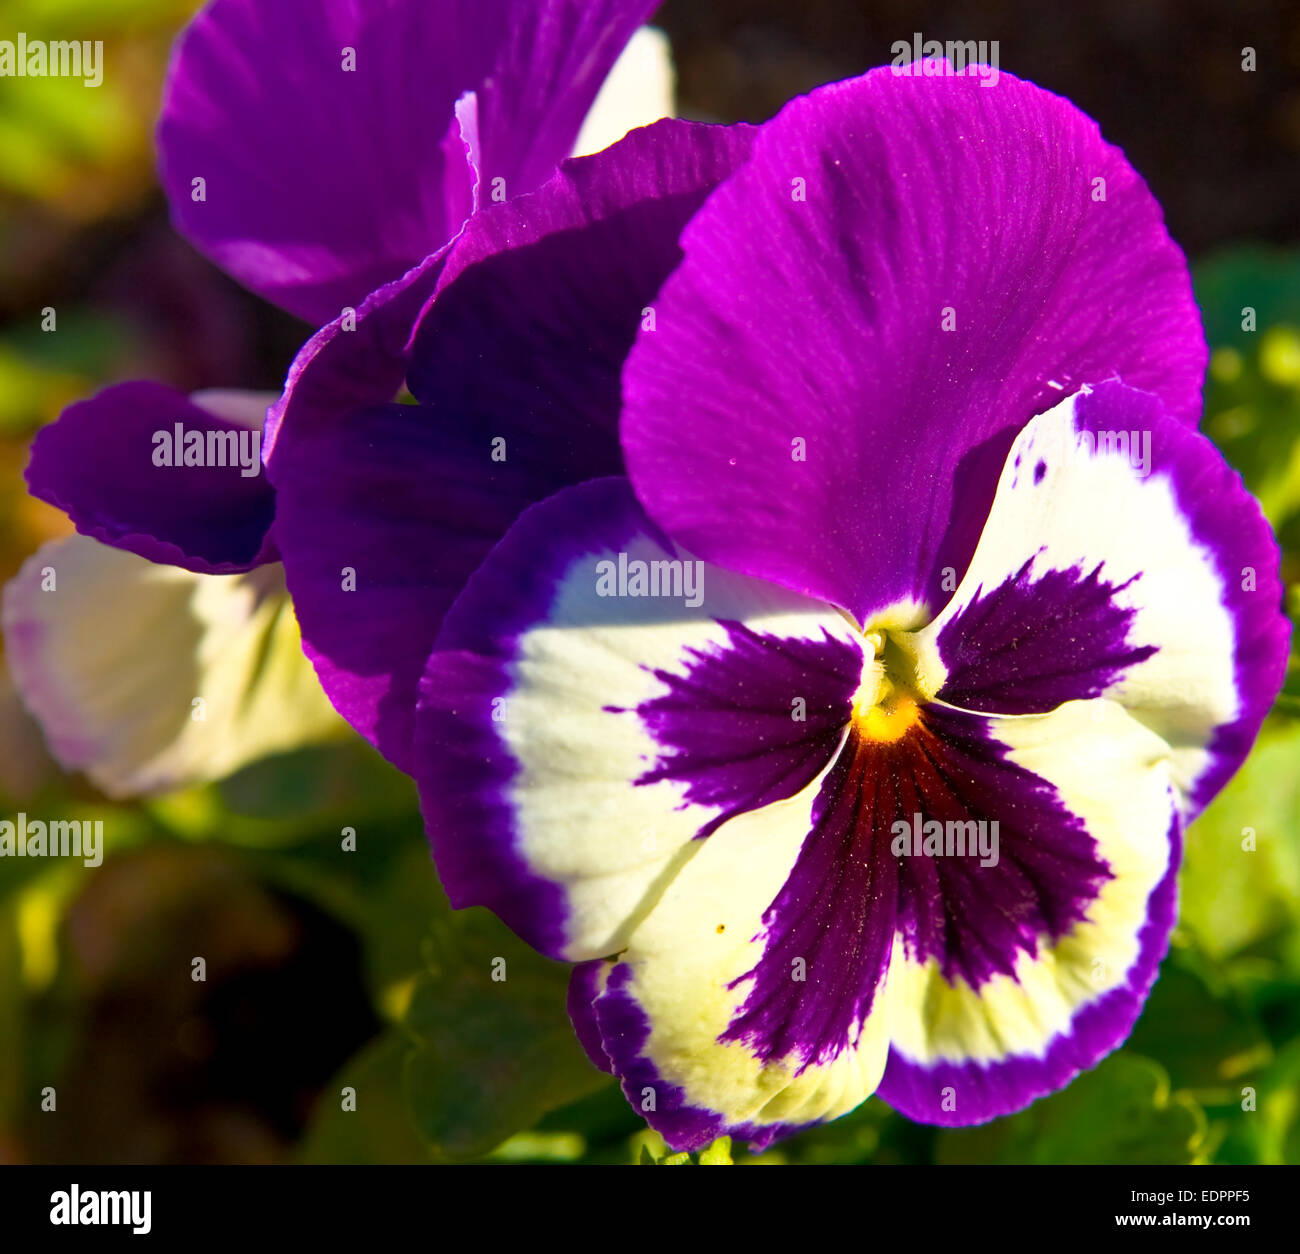 Pansy (viola tricolour) of mixed purple and white colour. Stock Photo